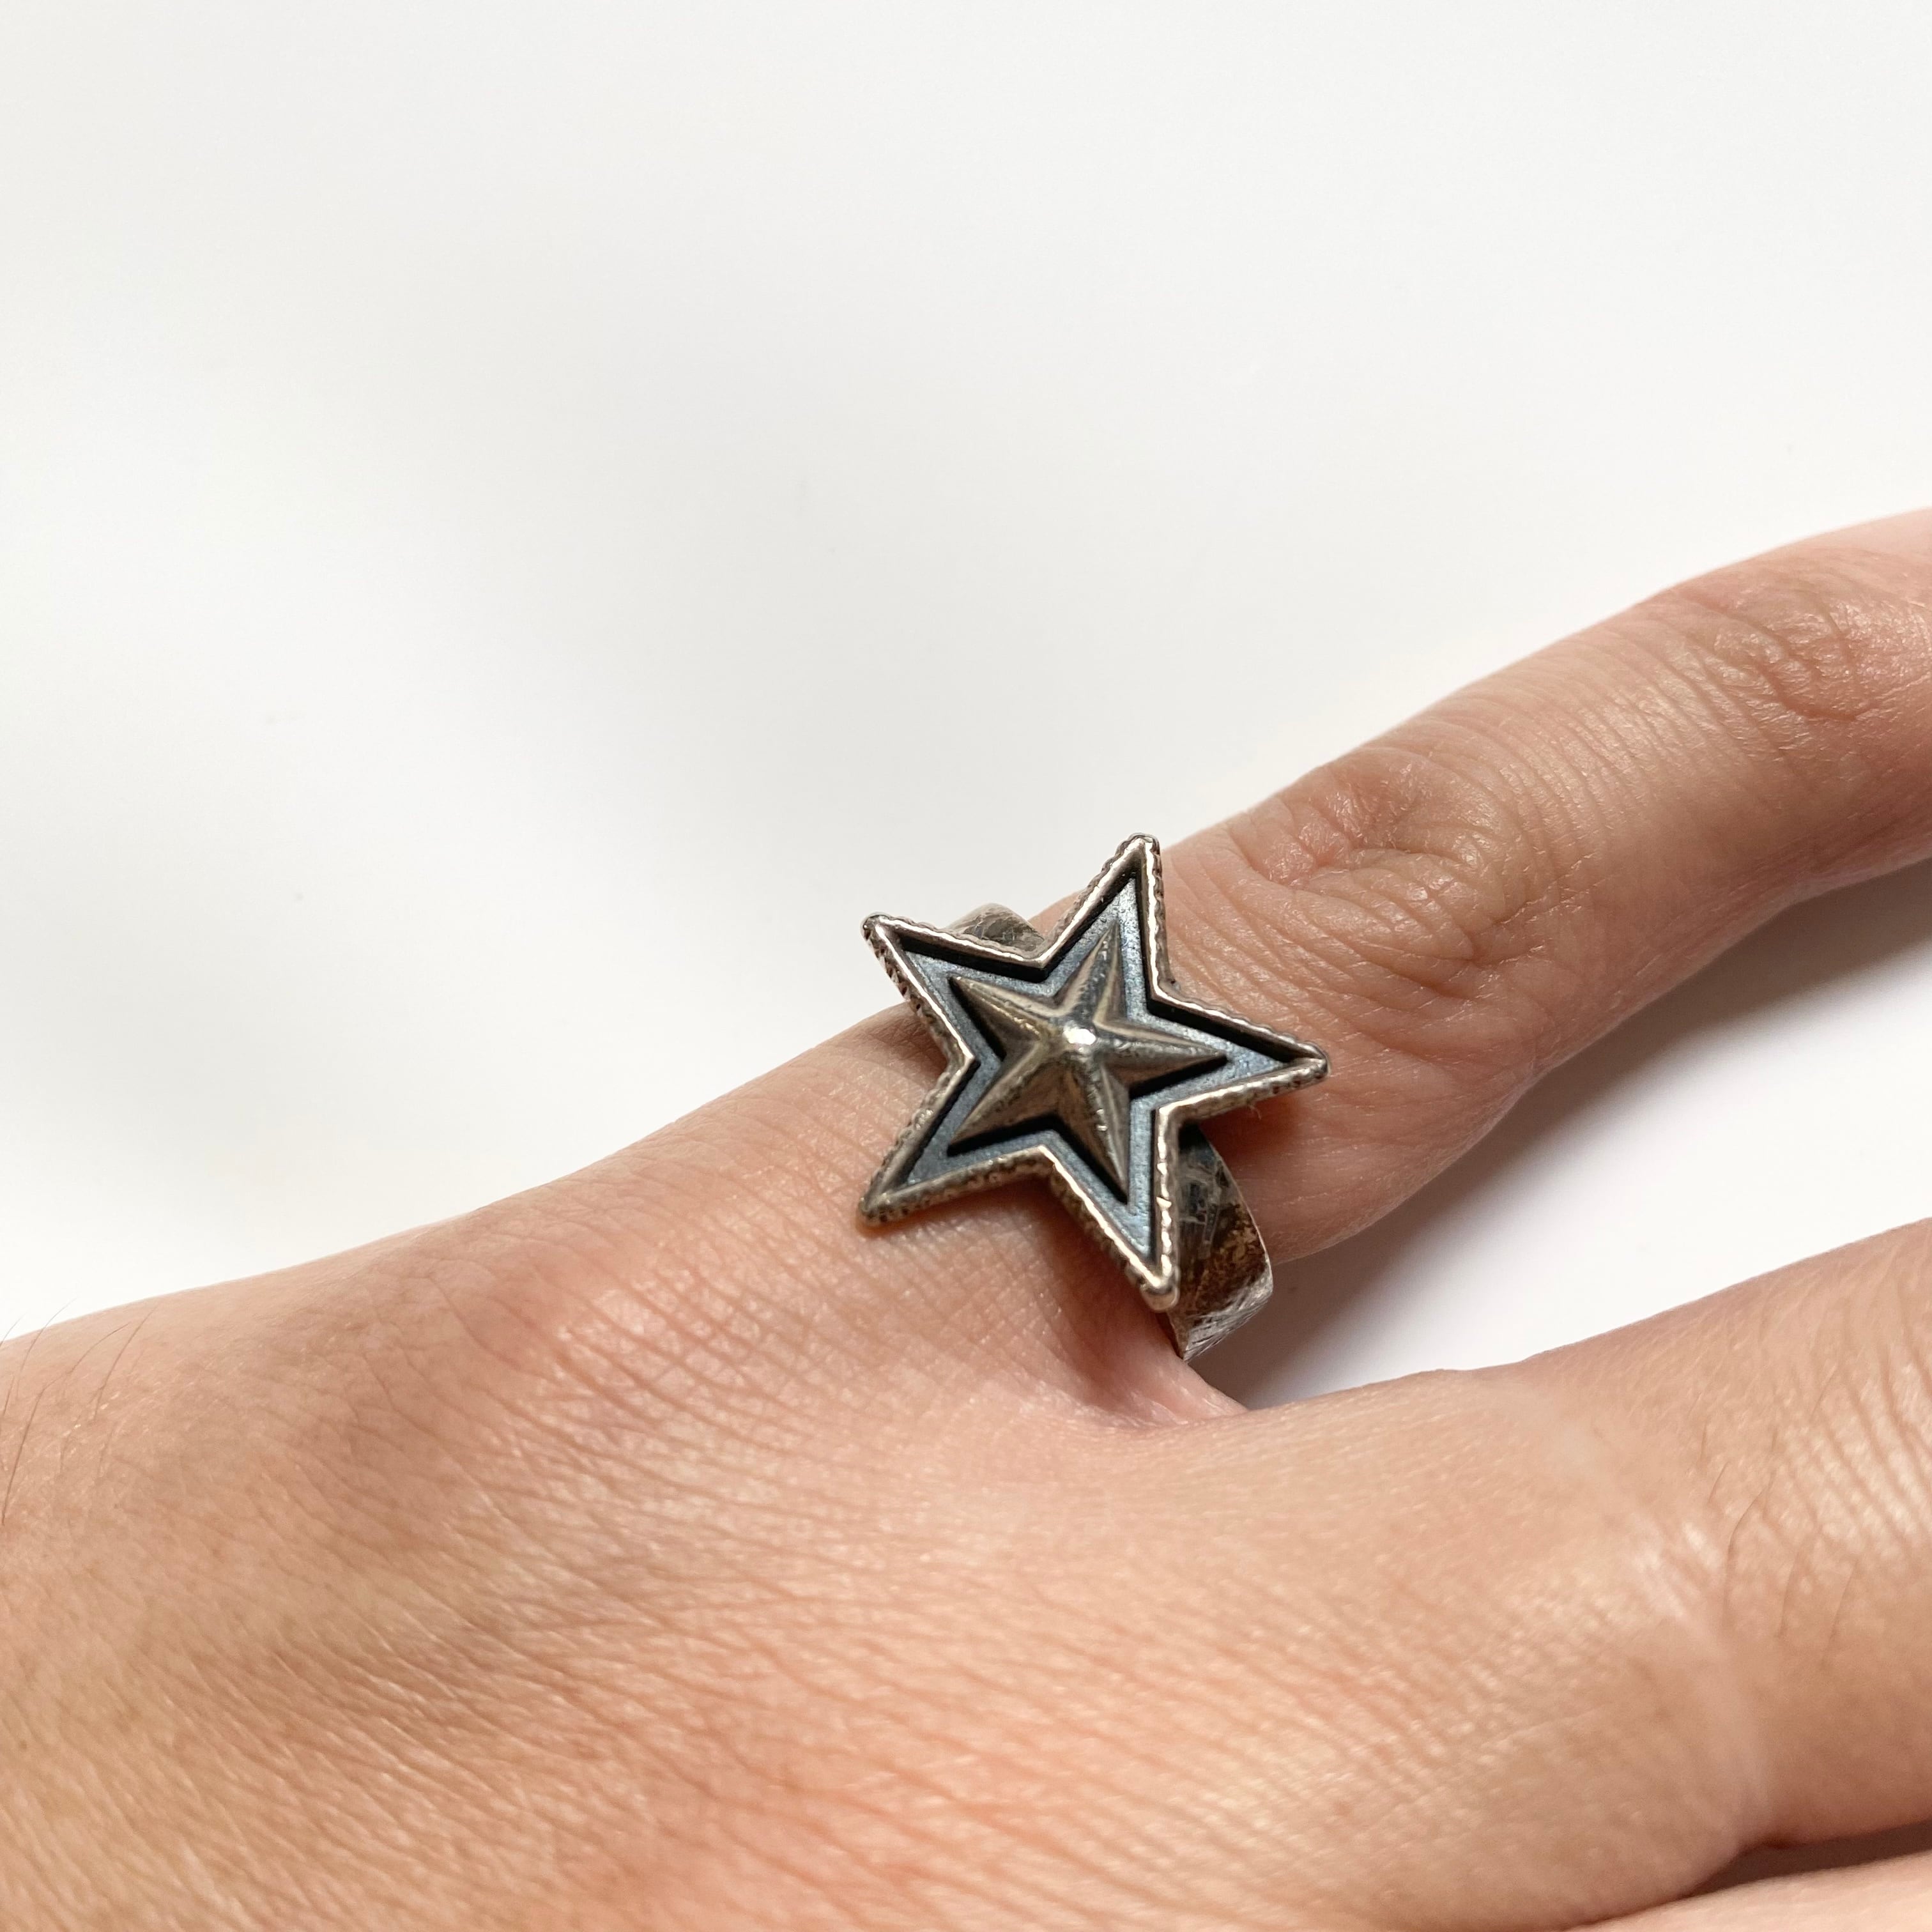 “Cody Sanderson” Pinky Star Ring | 放課後の思い出 powered by BASE